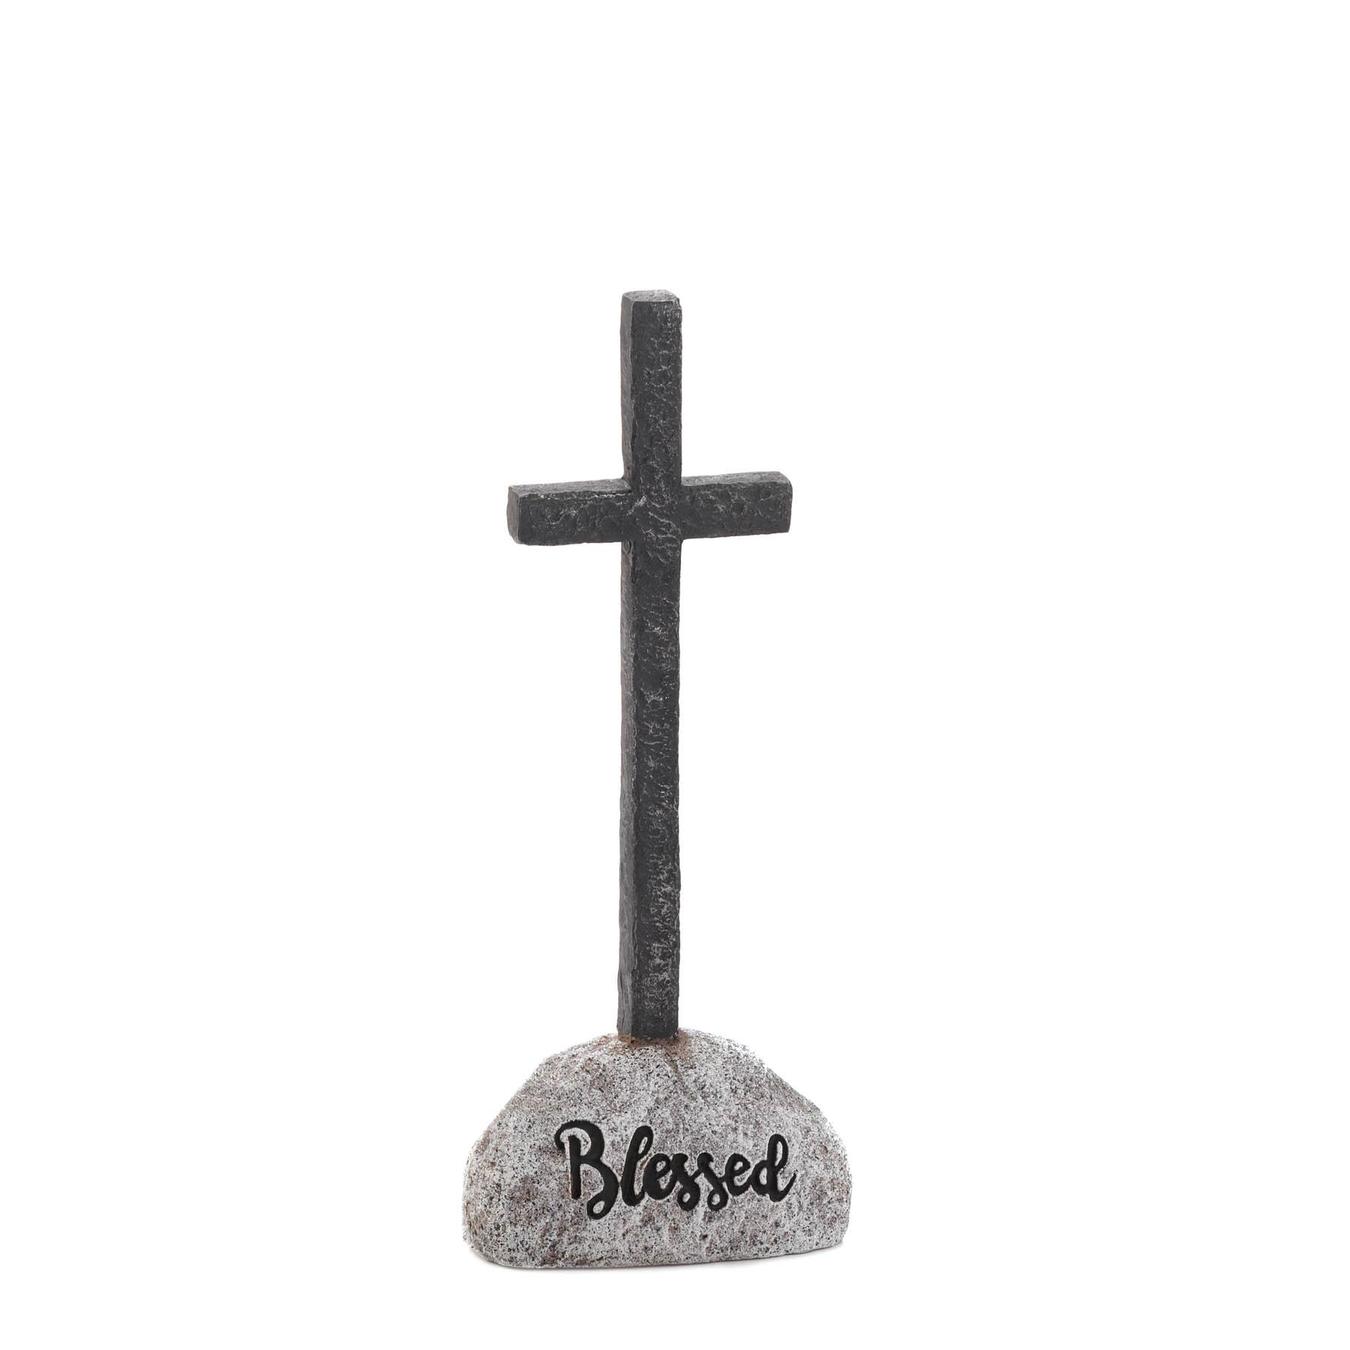 Blessed Cross Statue